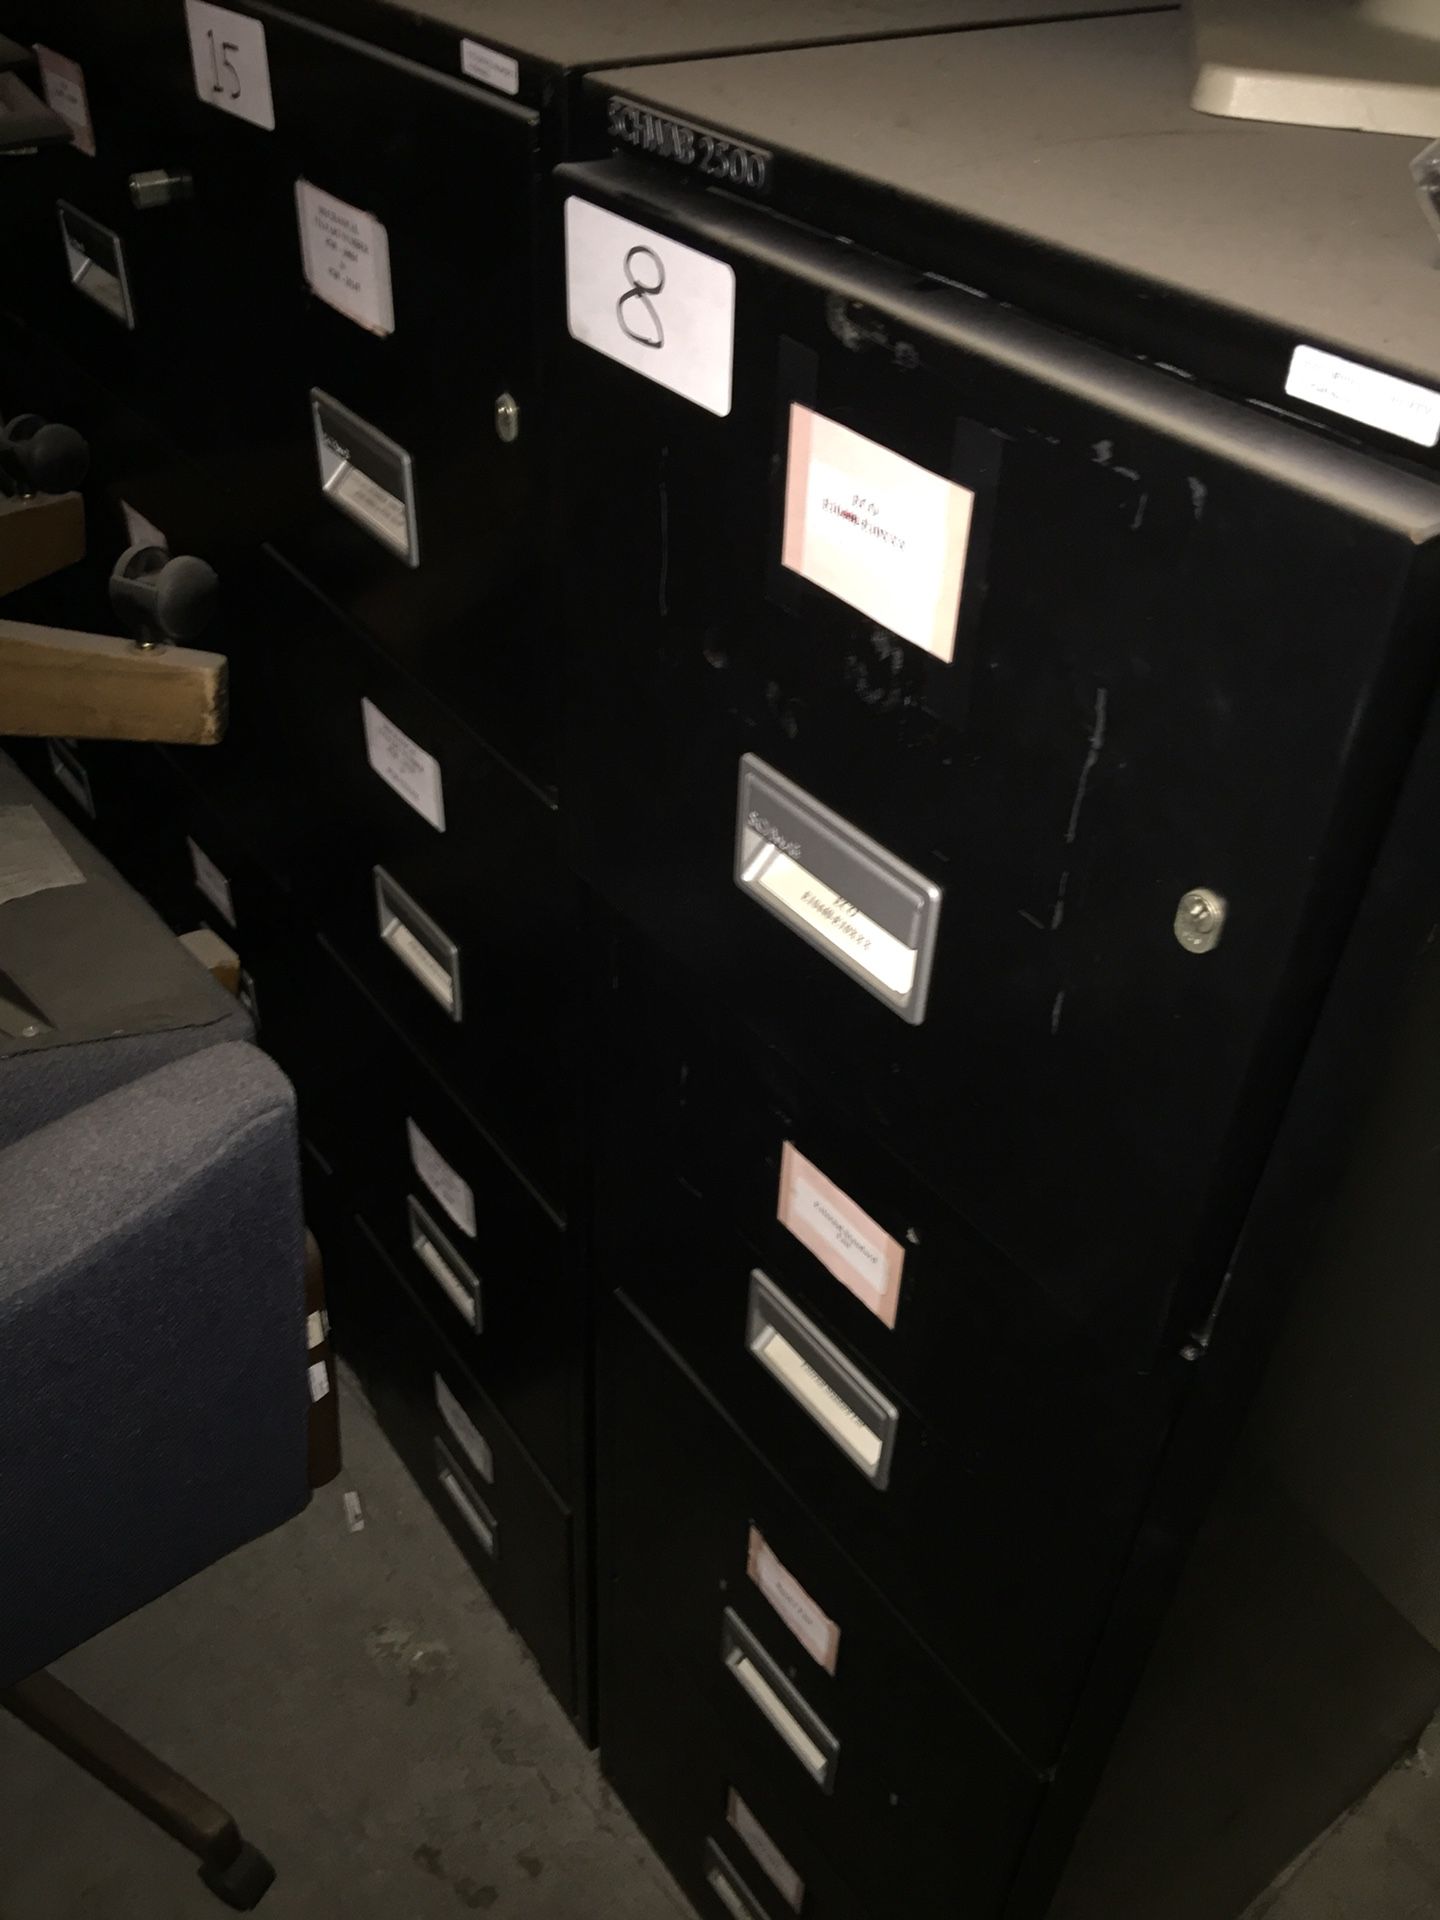 25 filing cabinets 10 are Schwab 2500 firesafe other 15 are Devon and others